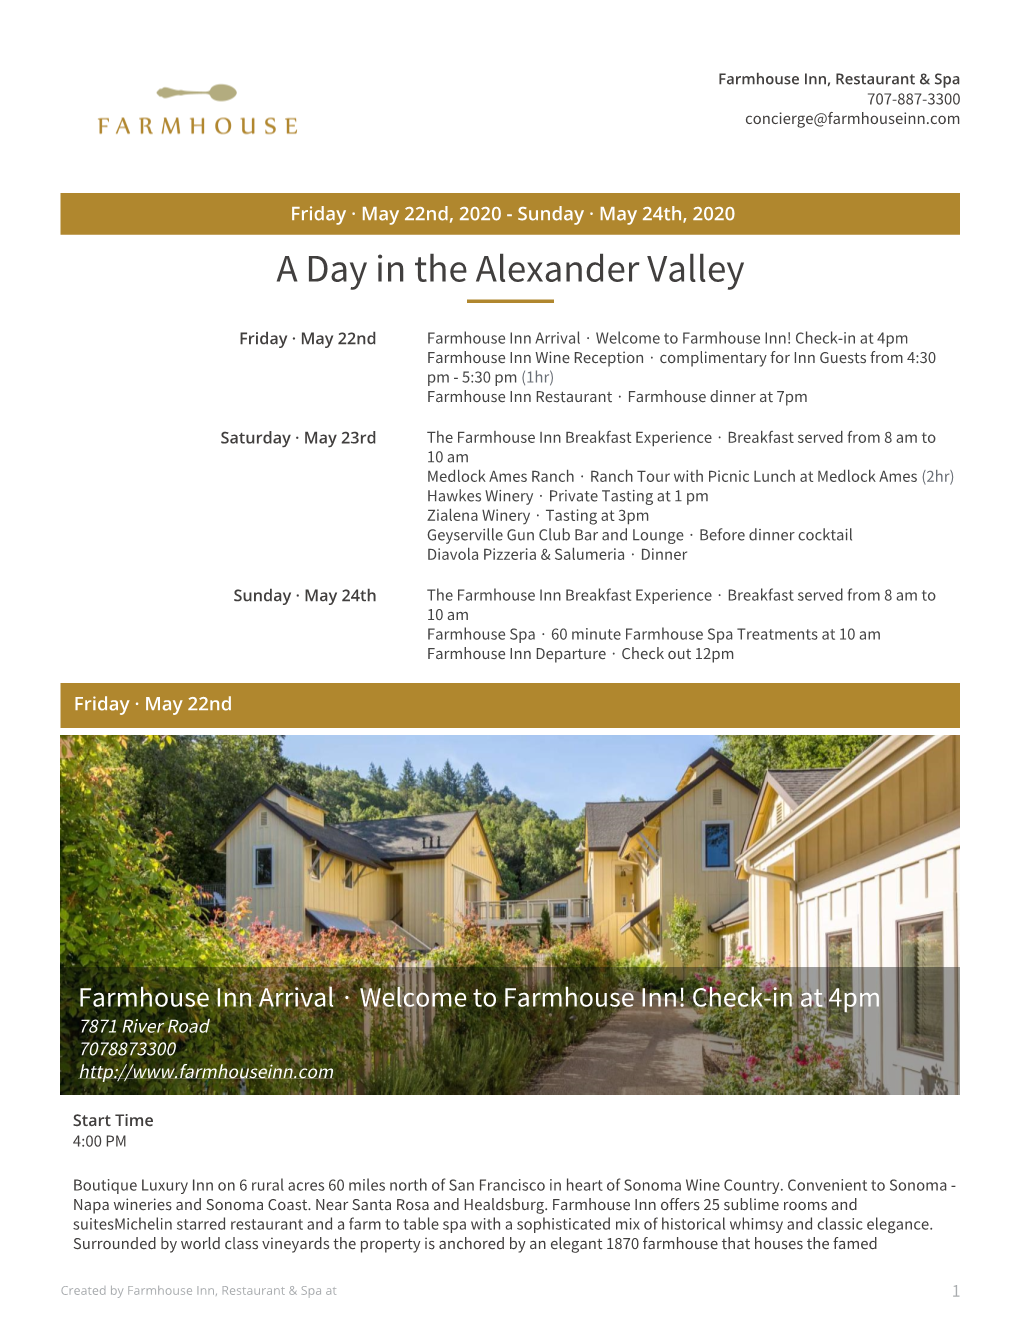 A Day in the Alexander Valley